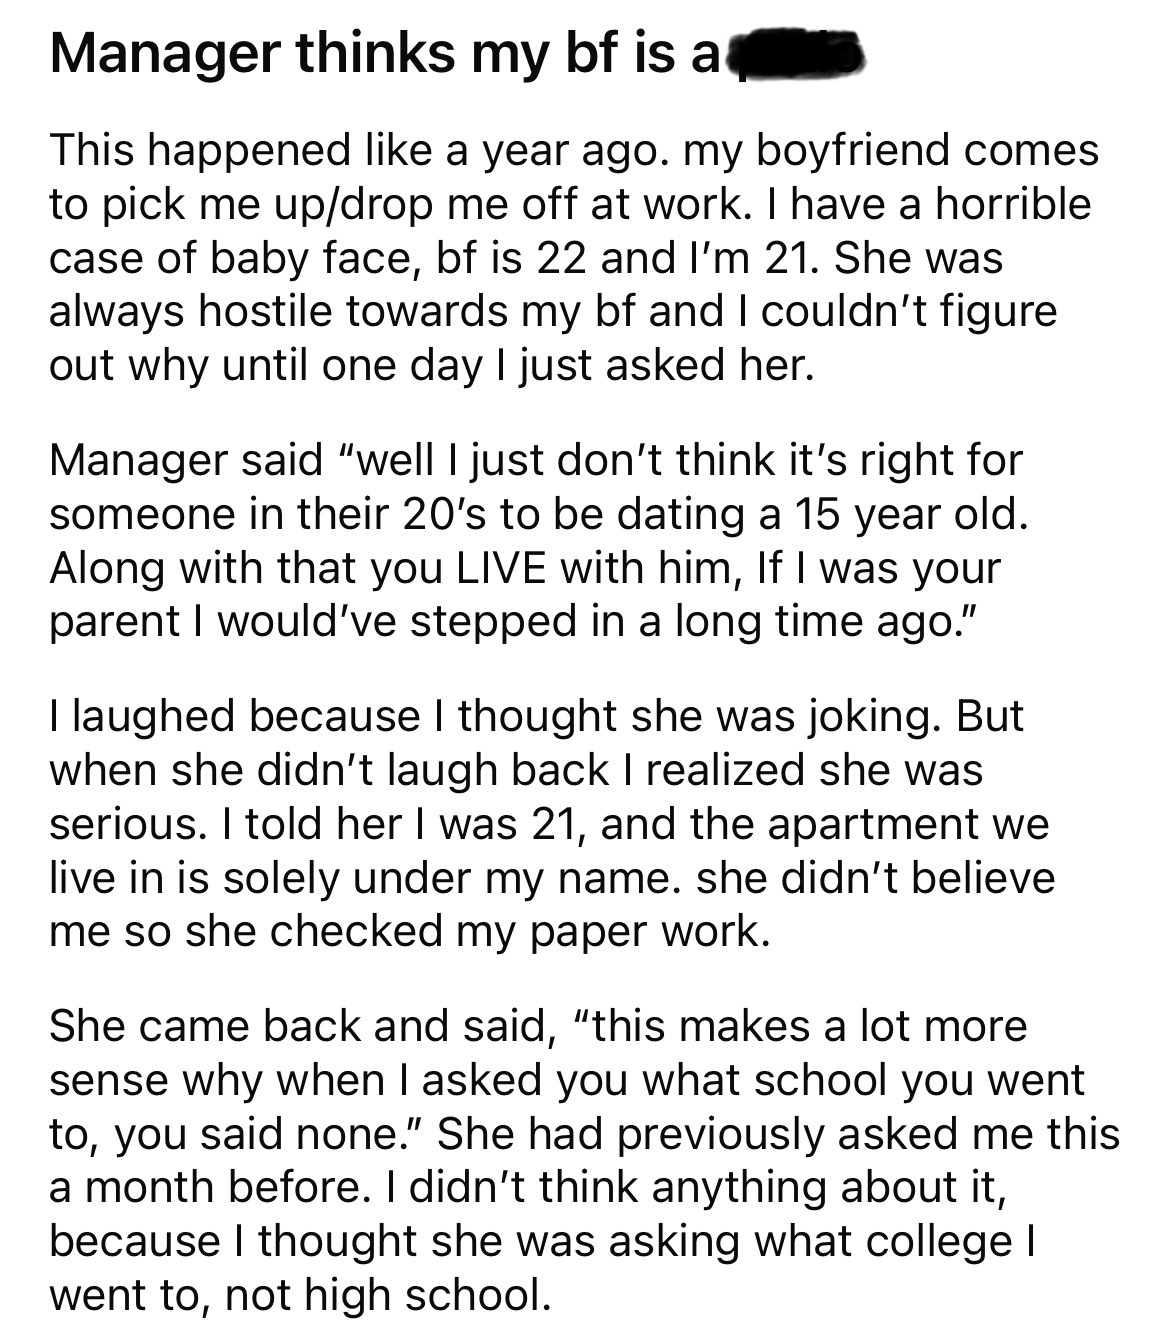 angle - Manager thinks my bf is a This happened a year ago. my boyfriend comes to pick me updrop me off at work. I have a horrible case of baby face, bf is 22 and I'm 21. She was always hostile towards my bf and I couldn't figure out why until one day I j